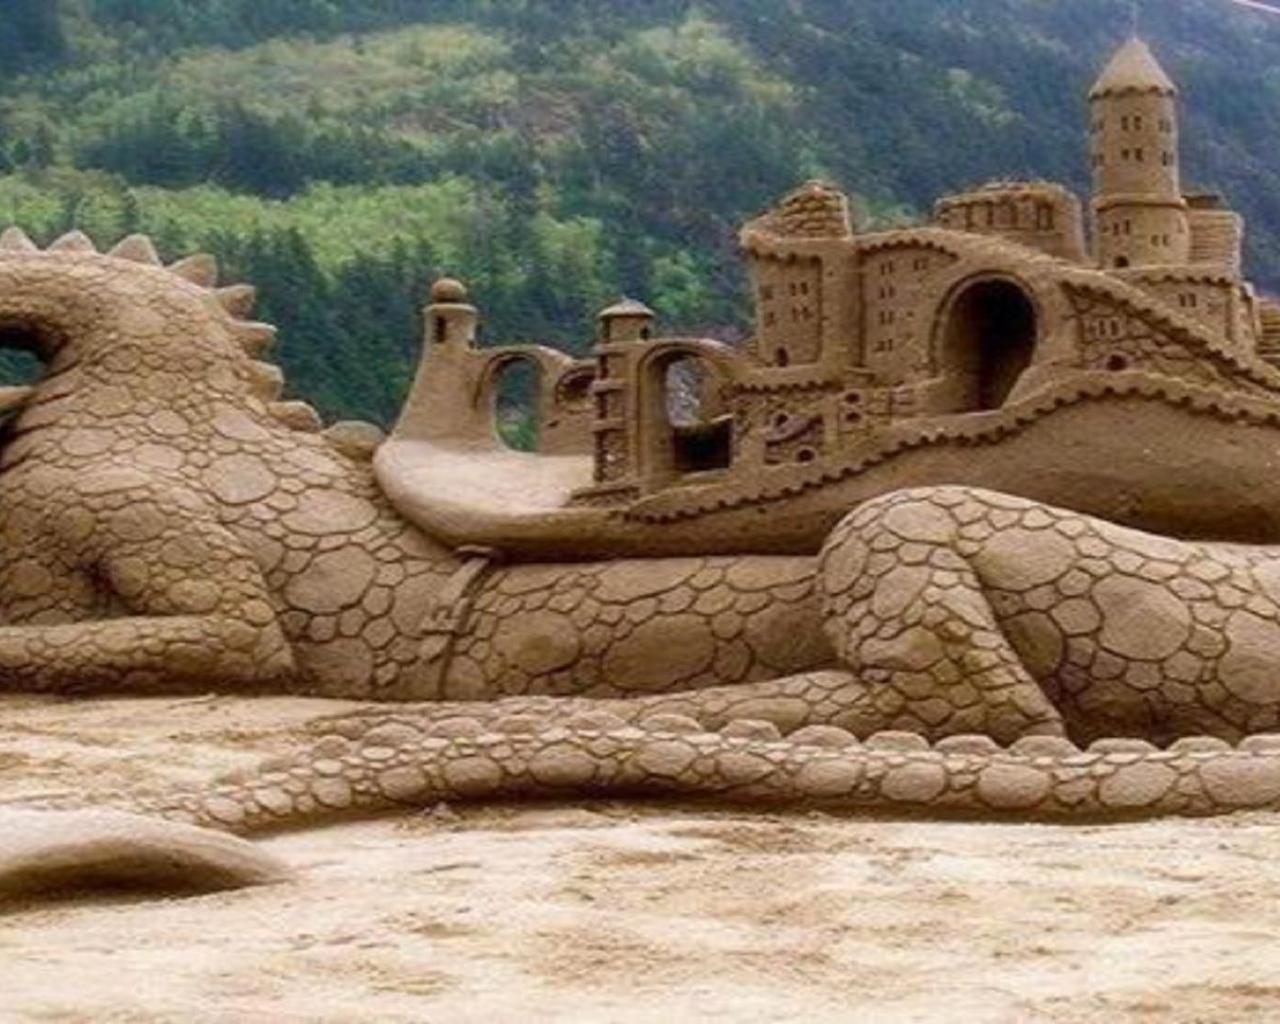 Sand castle 2   155114   High Quality and Resolution Wallpapers on